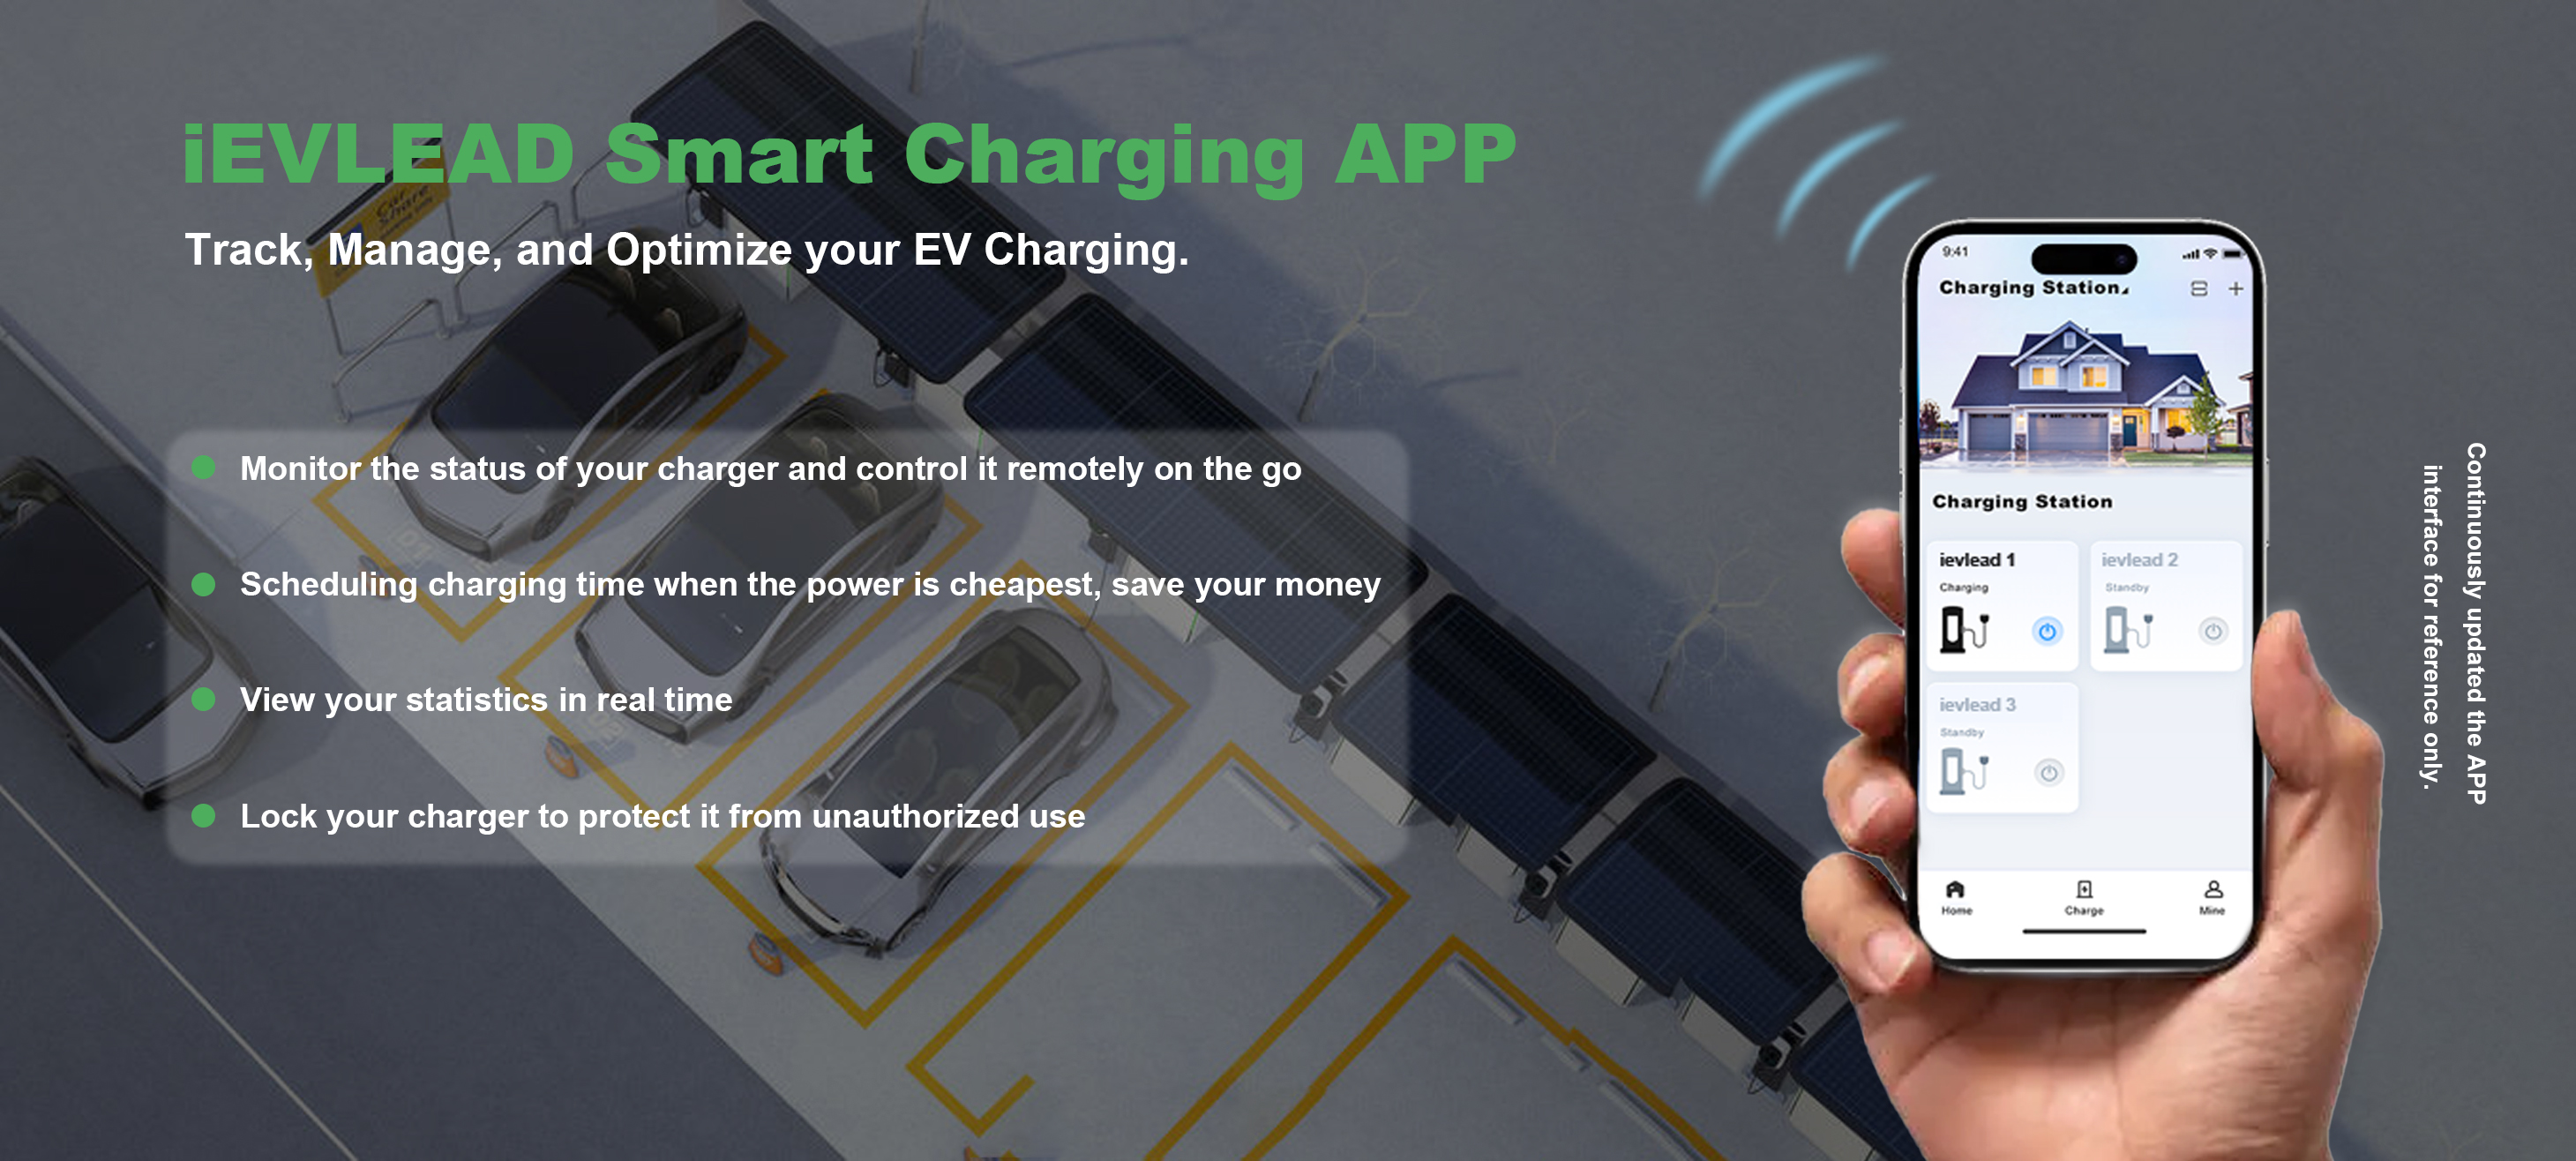 Ev Charger, Evse Charger, Car Charger - iEVLEAD